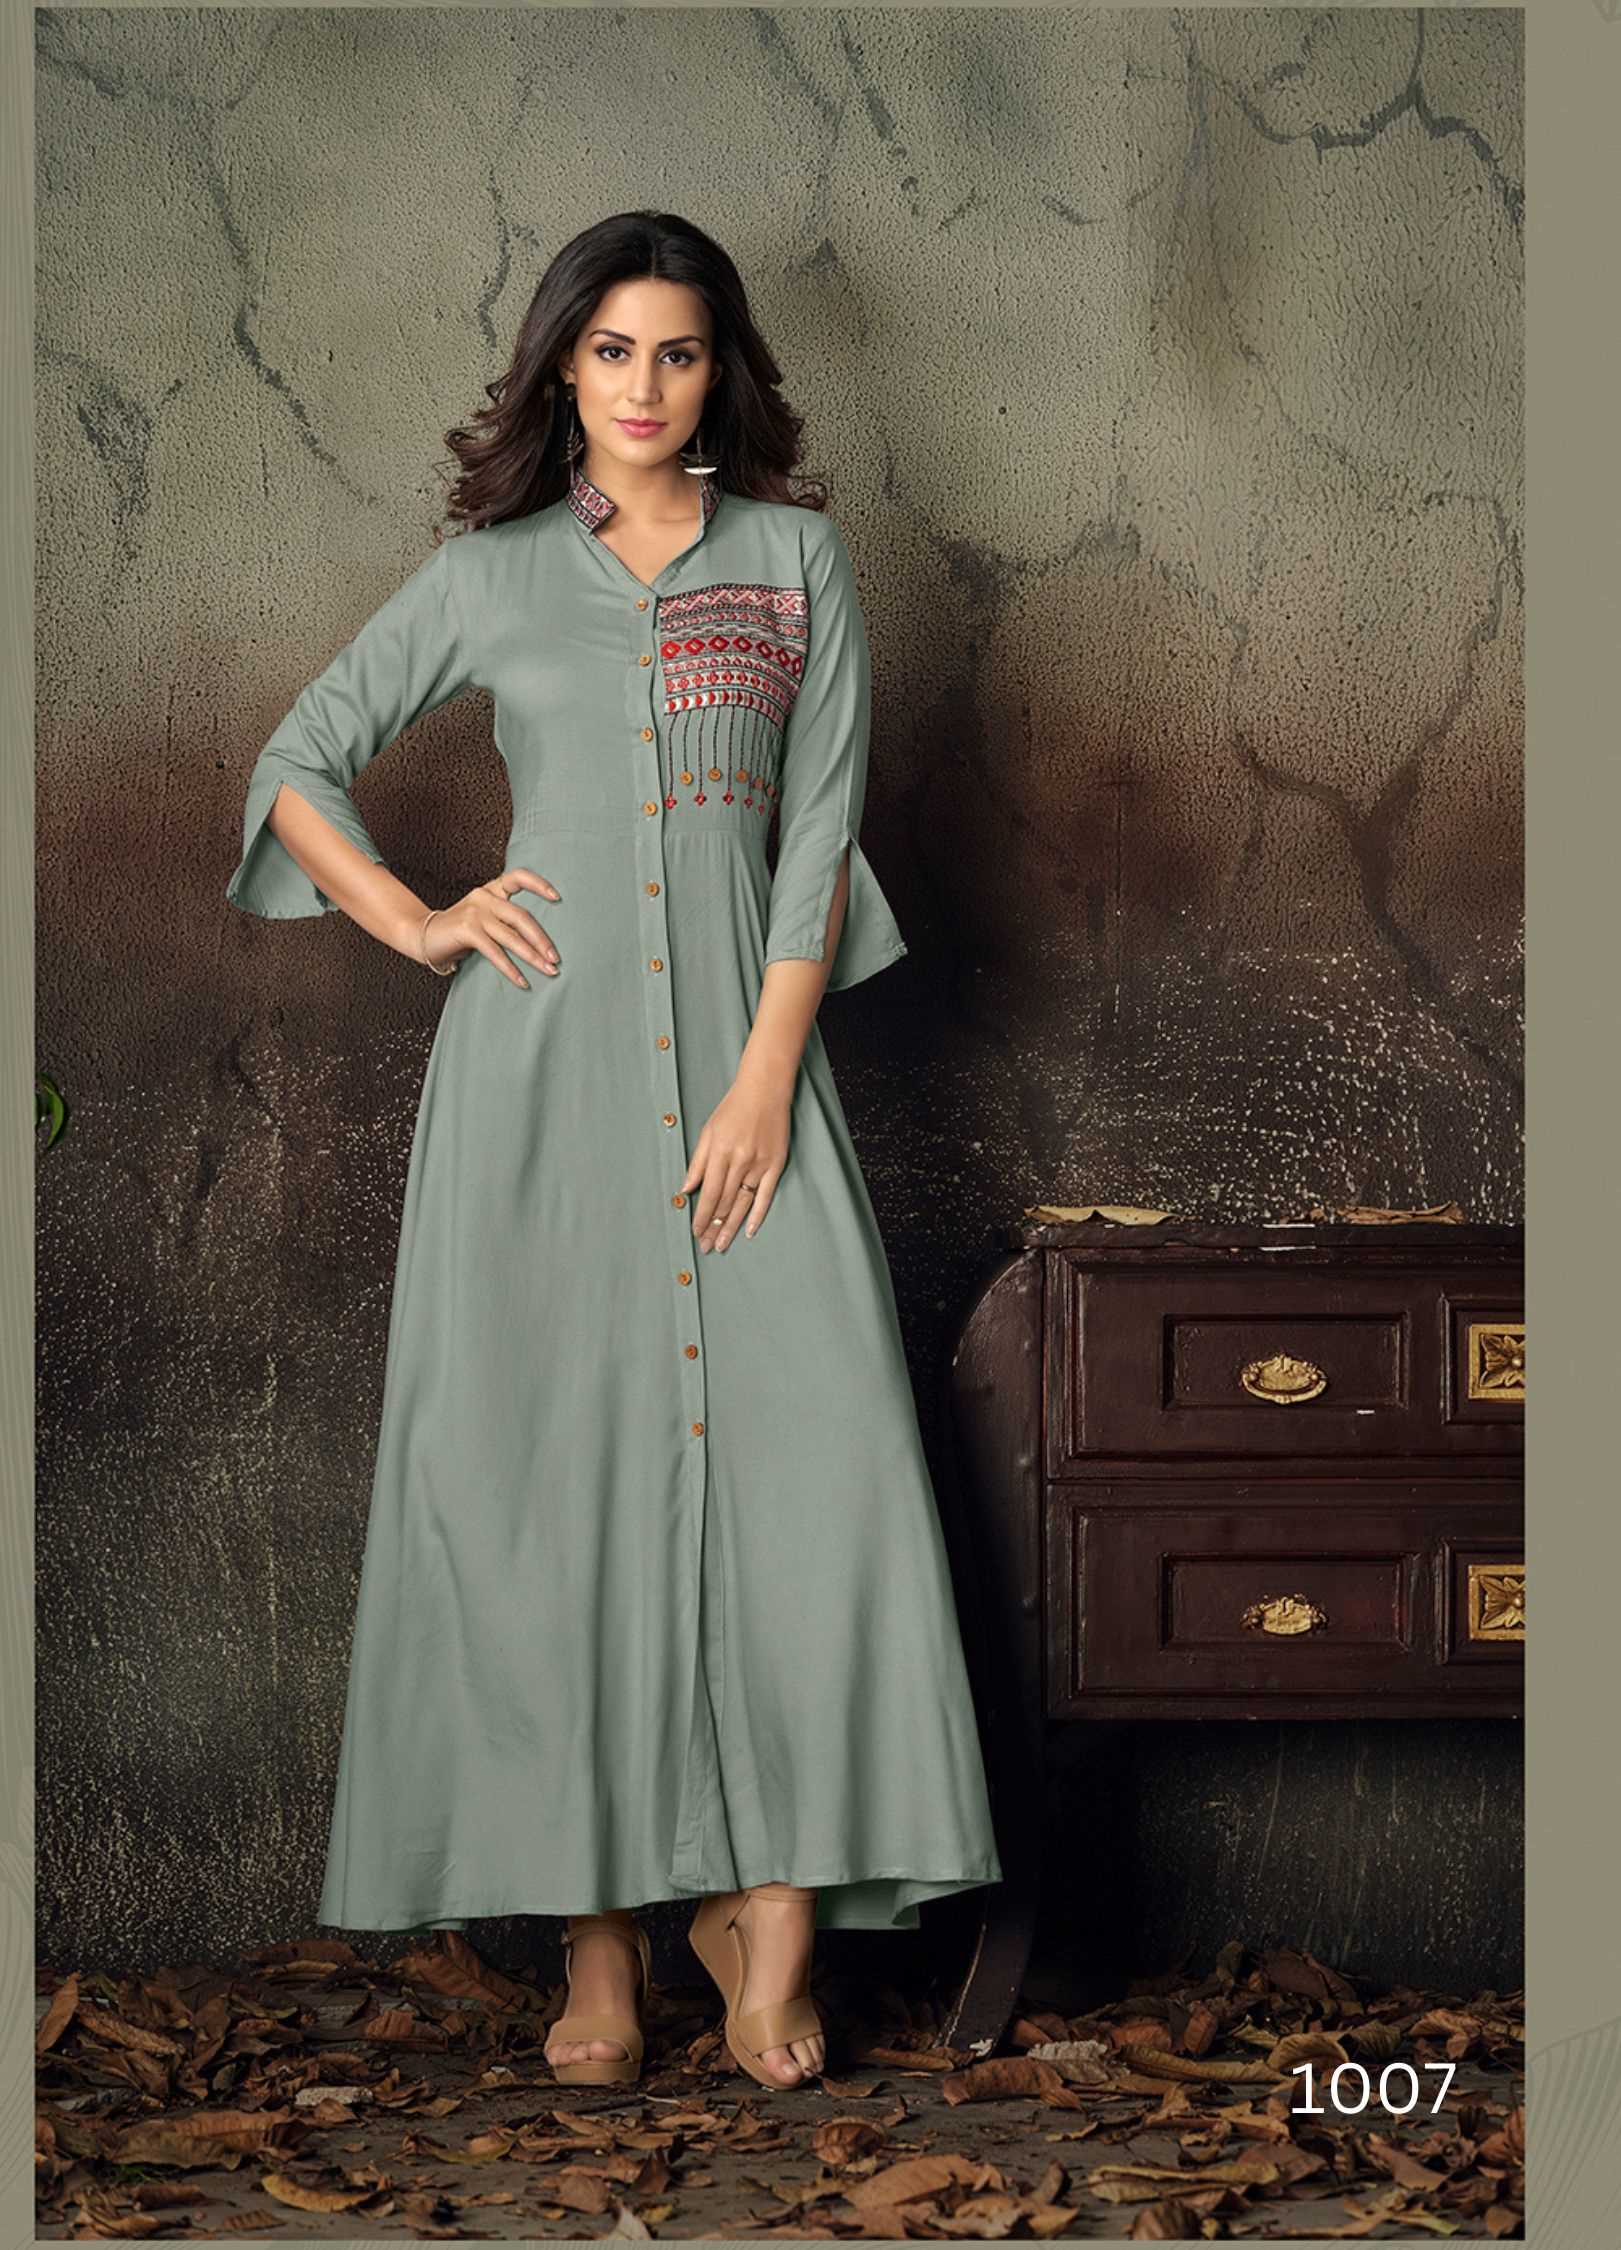 Be it girls or women, Designer kurtis are available at up to 90% off, Best  deal for all - Websmyle